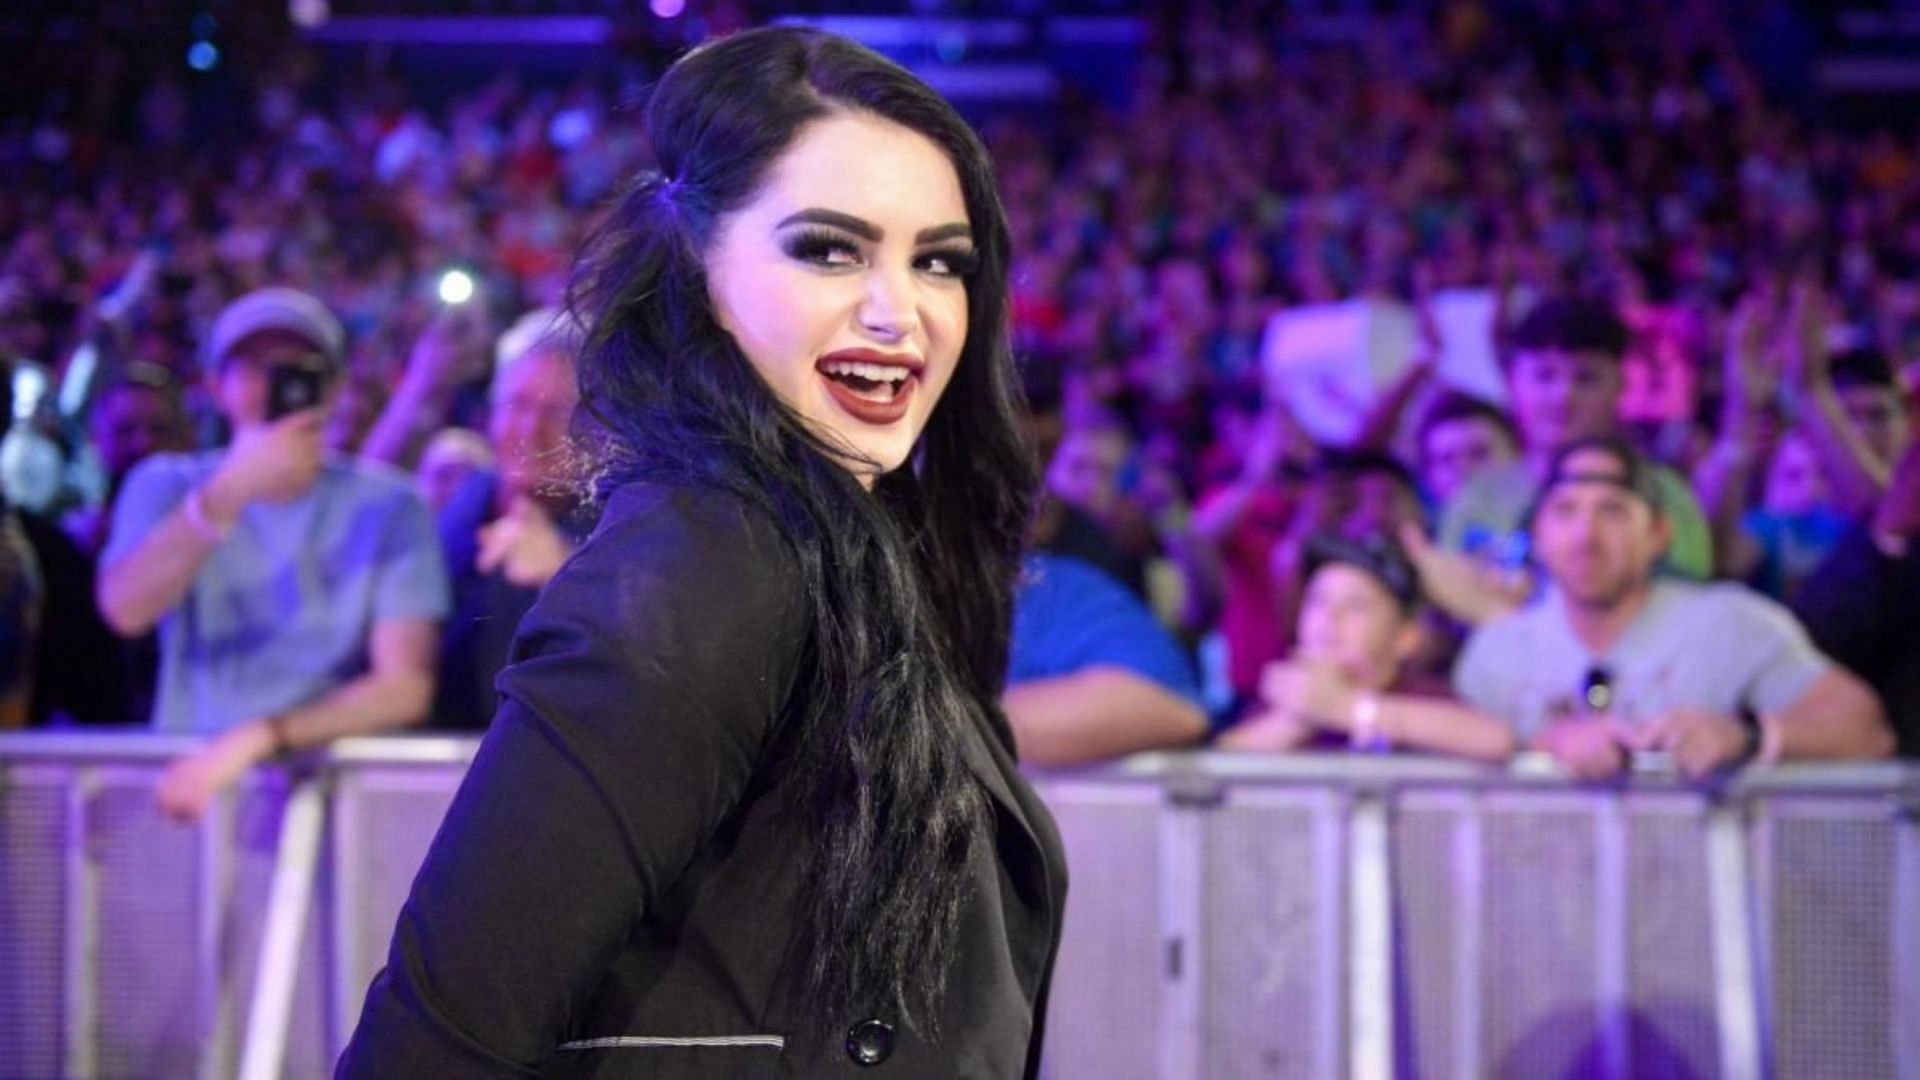 Paige&#039;s contract will expire next month